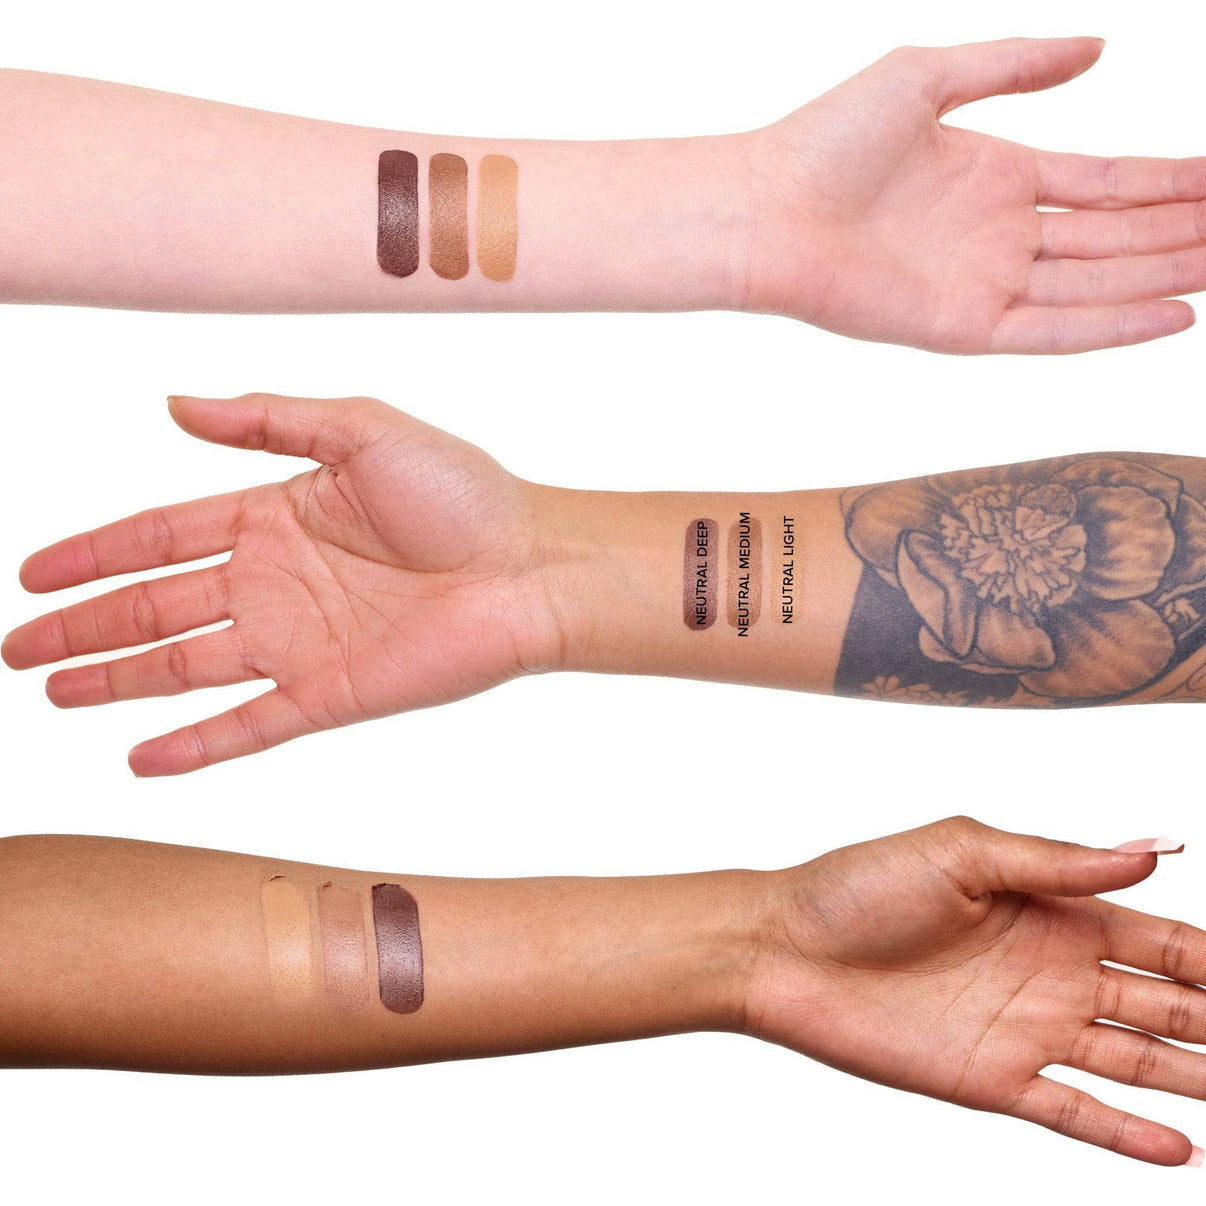 Arms with swatches of Tinted Blur Sculpt Stick light